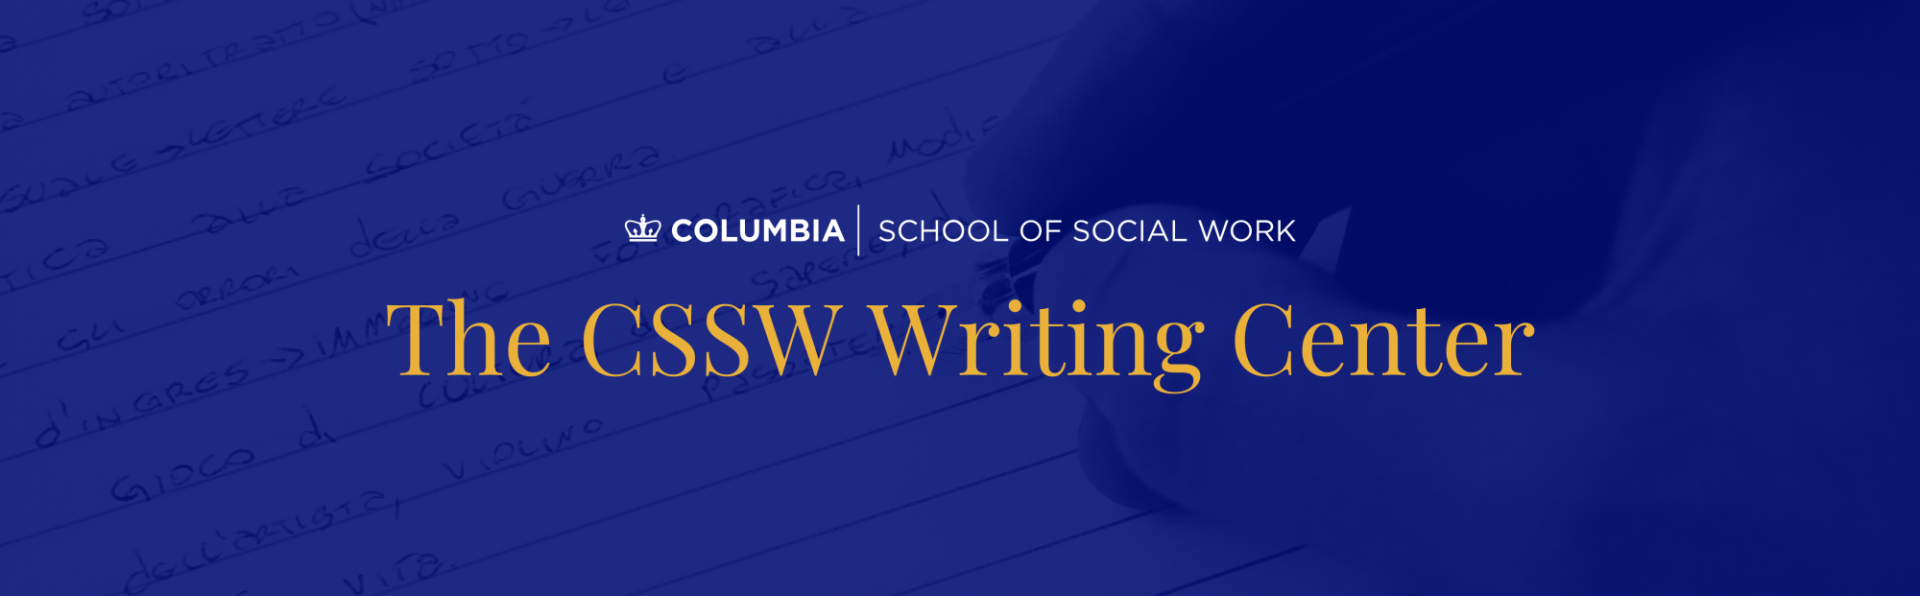 Image of hand holding pen to paper. Text says "The CSSW Writing Center"